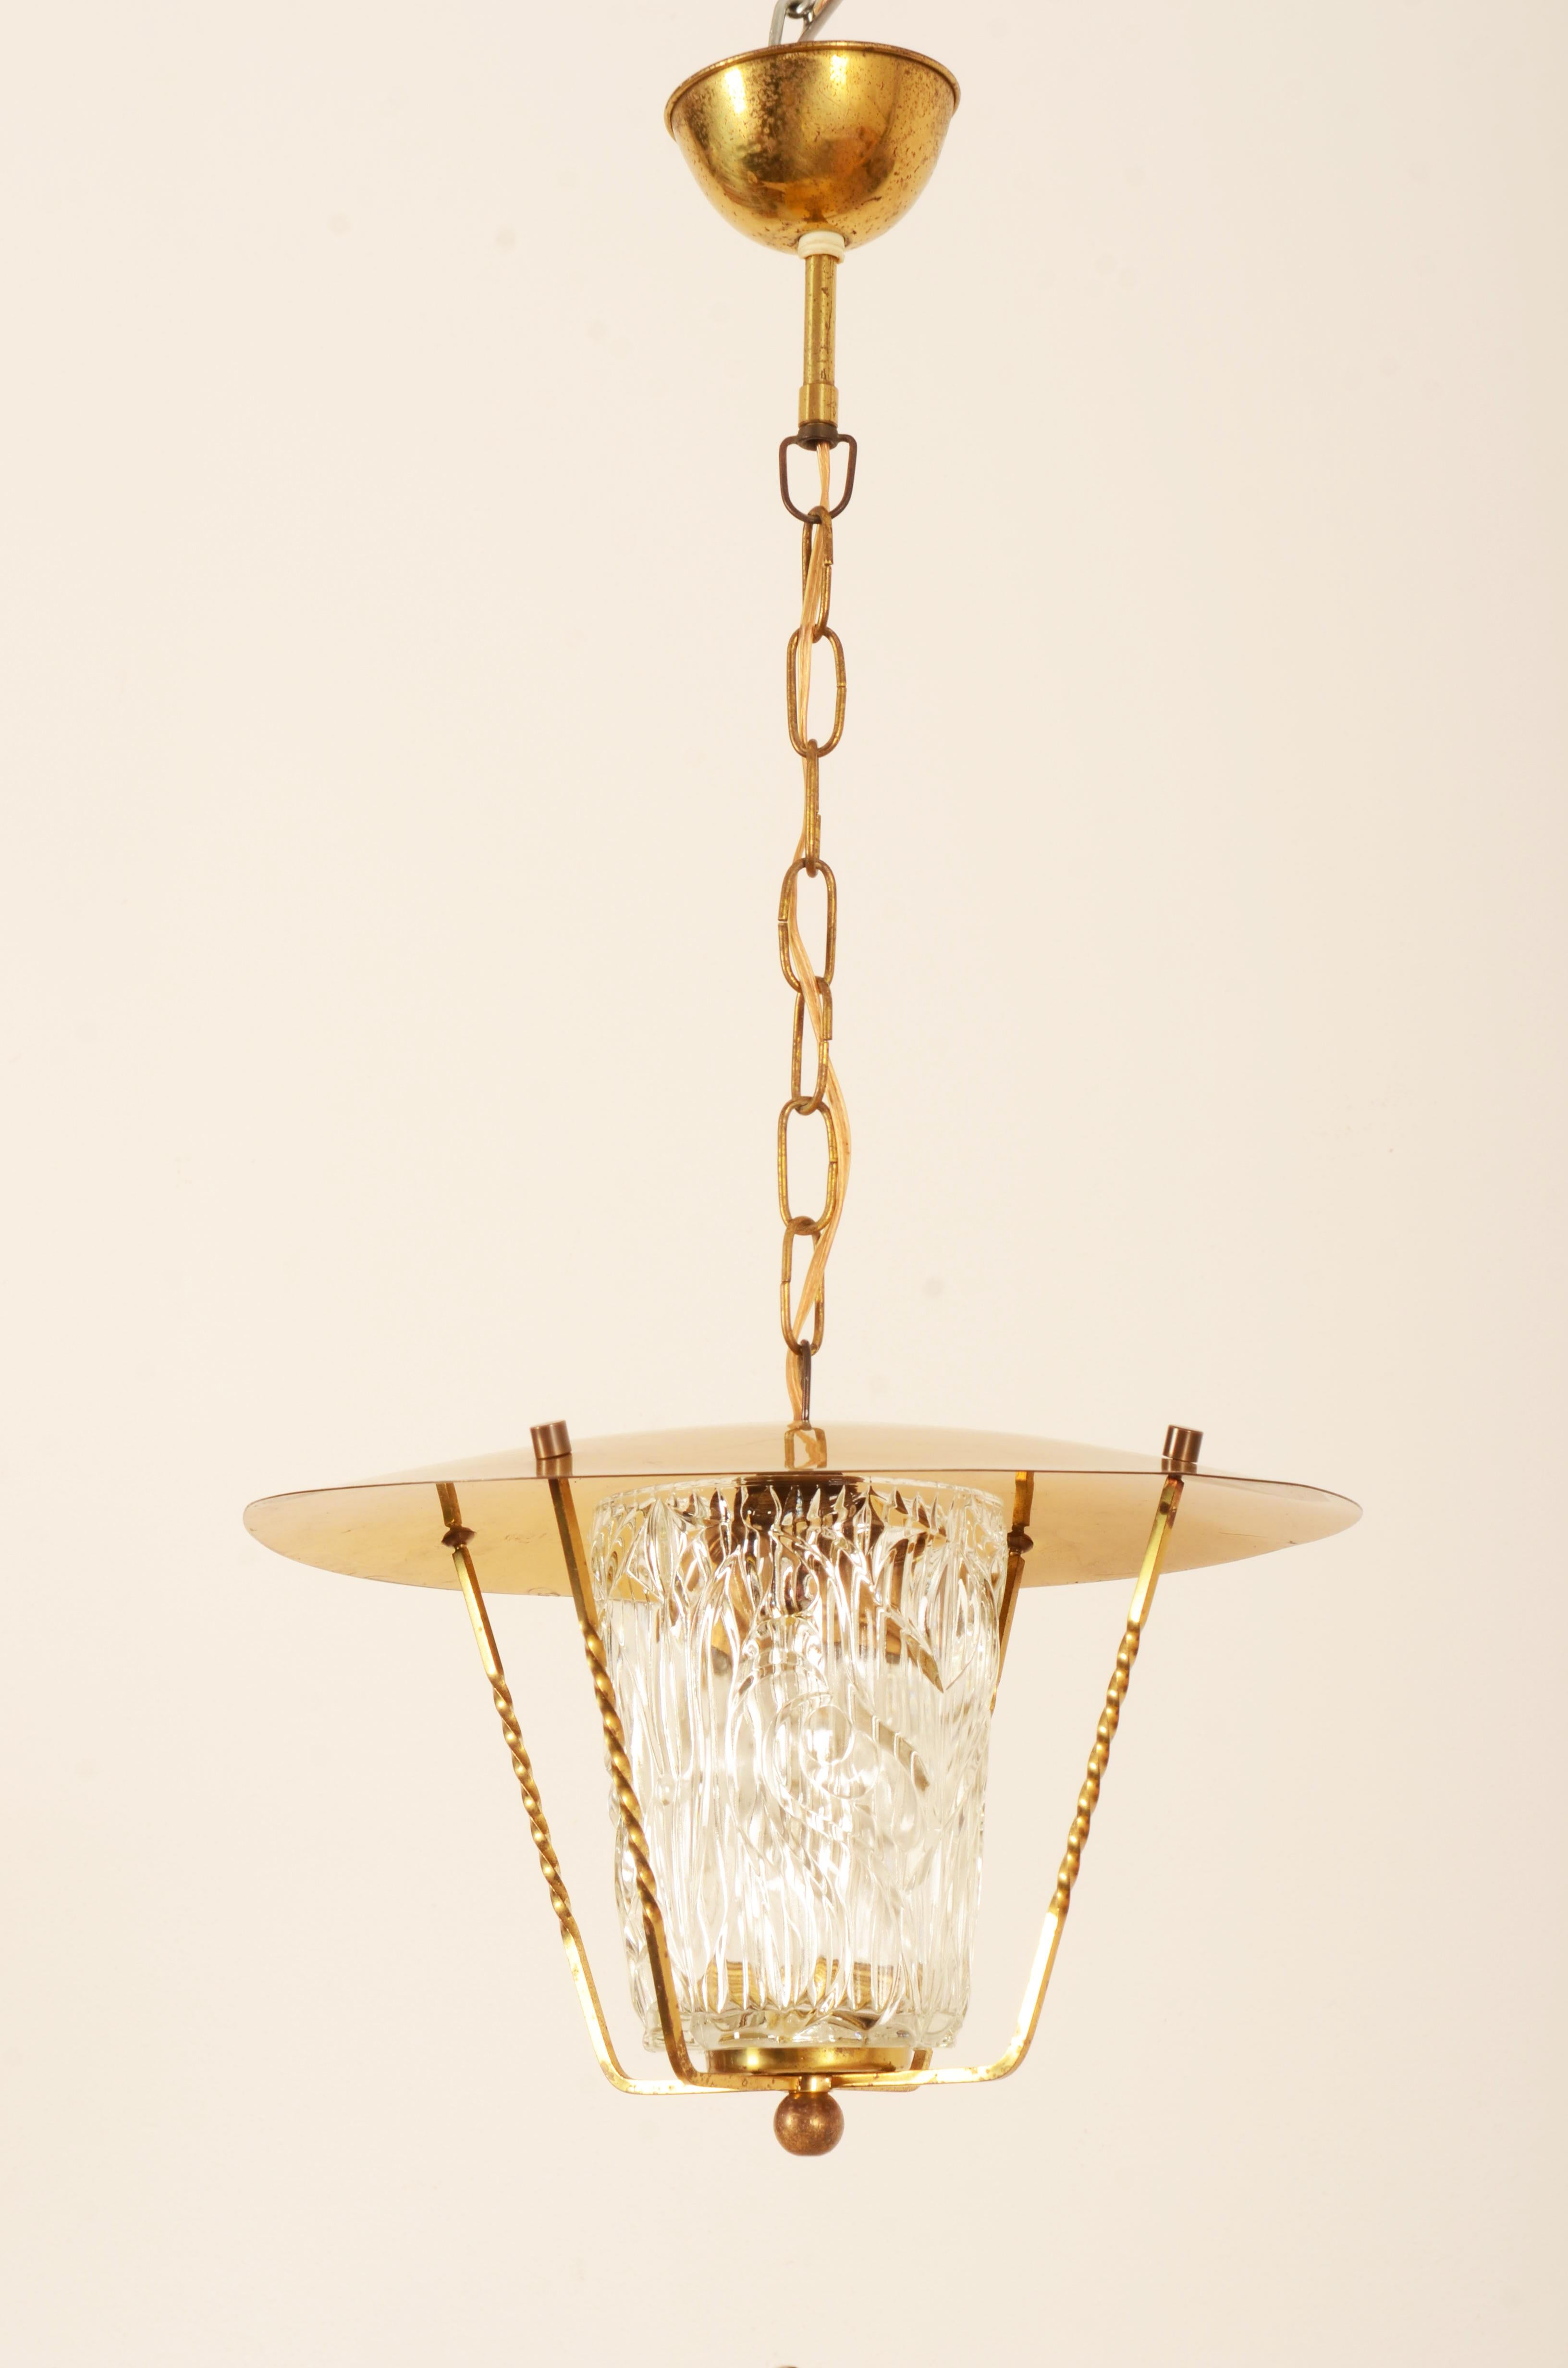 Mid-20th Century Midcentury Brass Pendant Lamp With Structured Glass Shade 